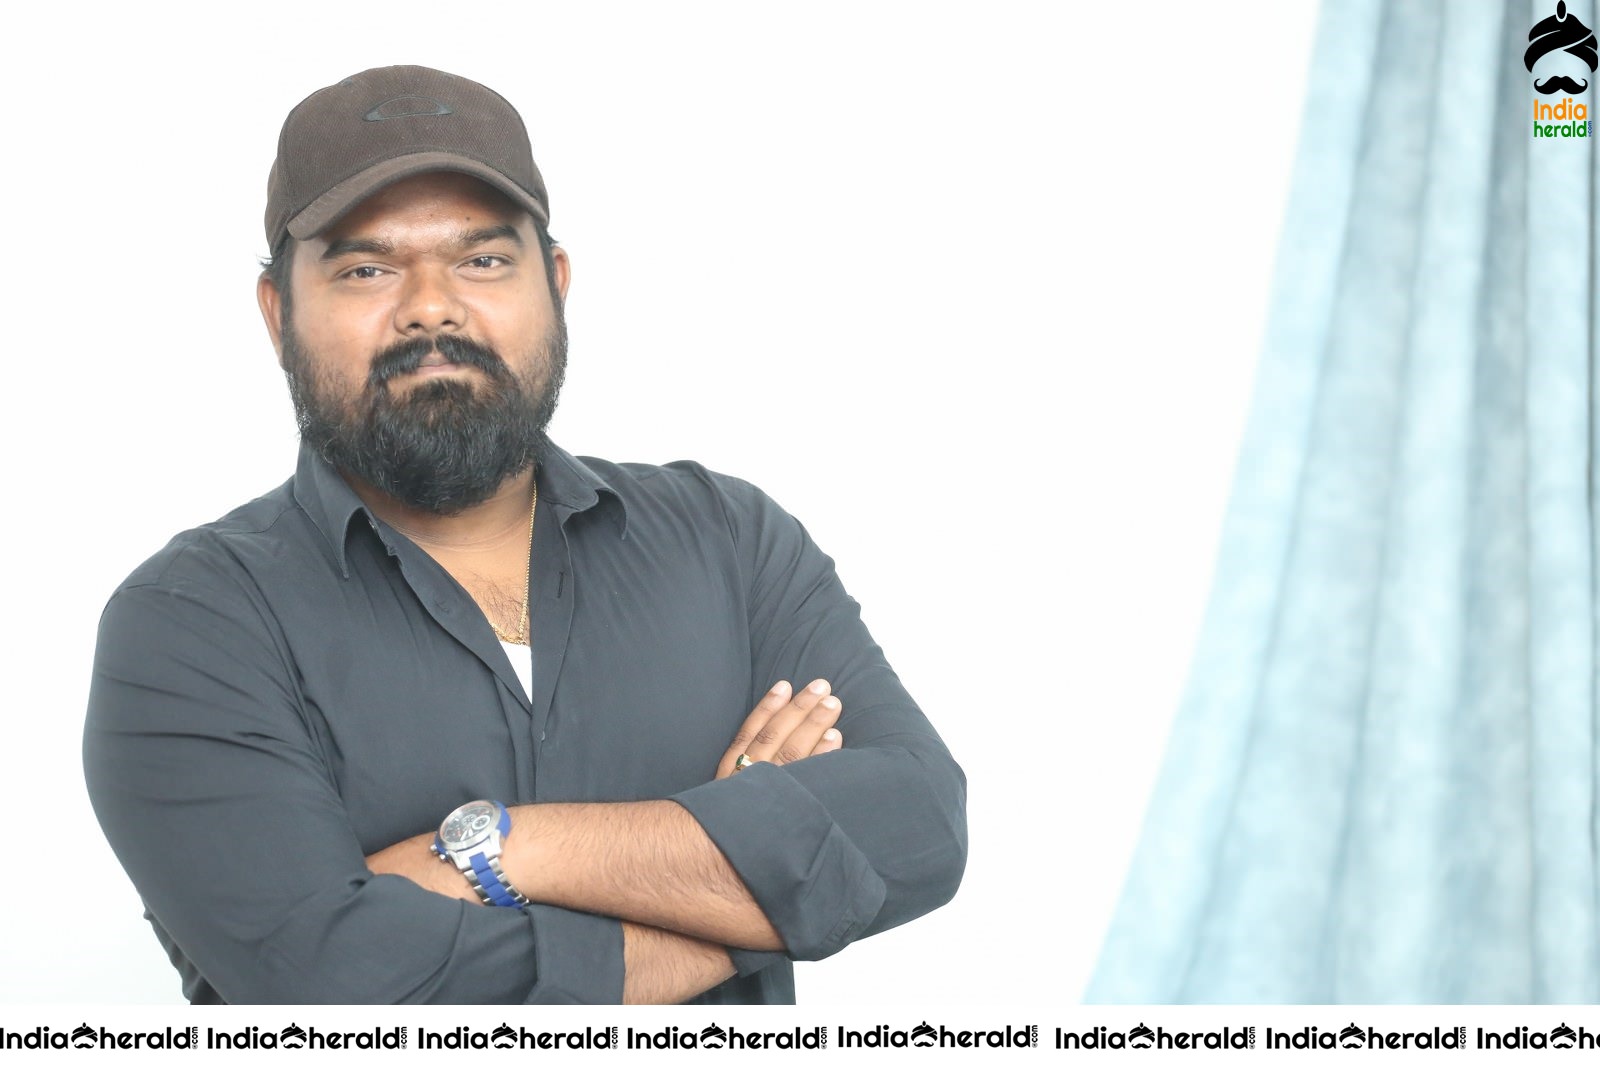 Director Venky Kudumula speaks on his future projects